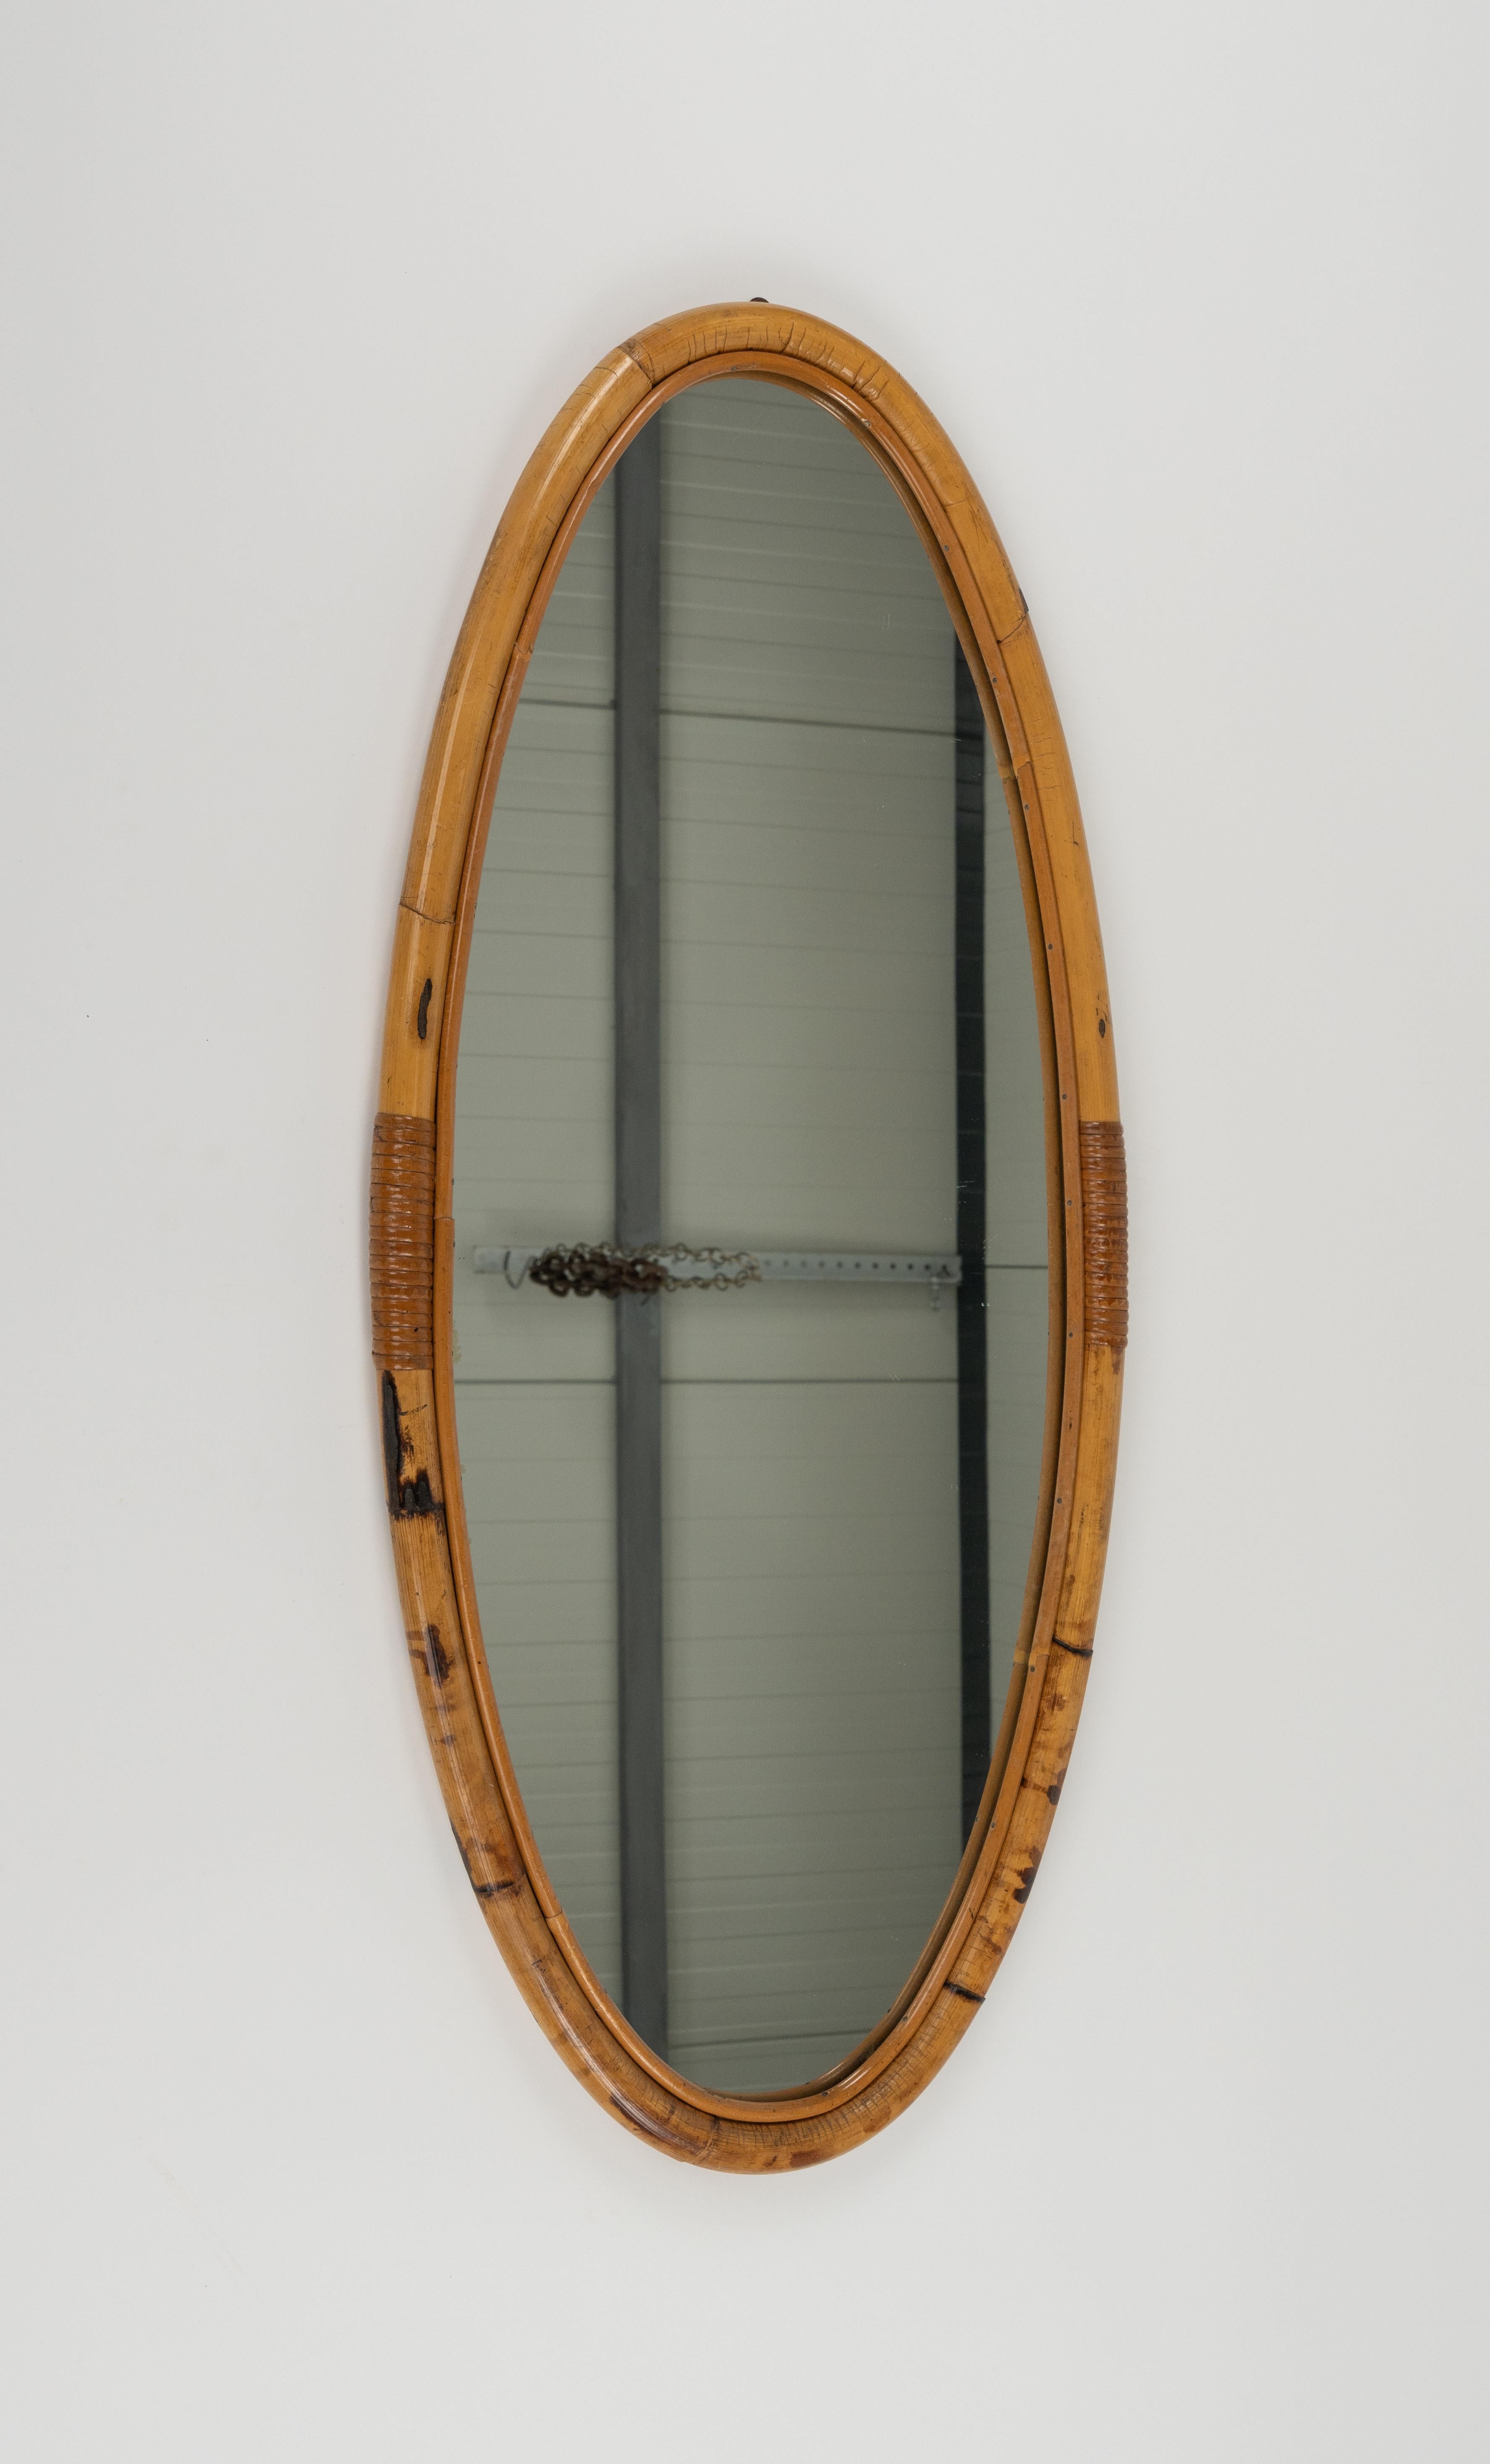 Midcentury Bamboo and Rattan Oval Wall Mirror, Italy 1970s For Sale 5